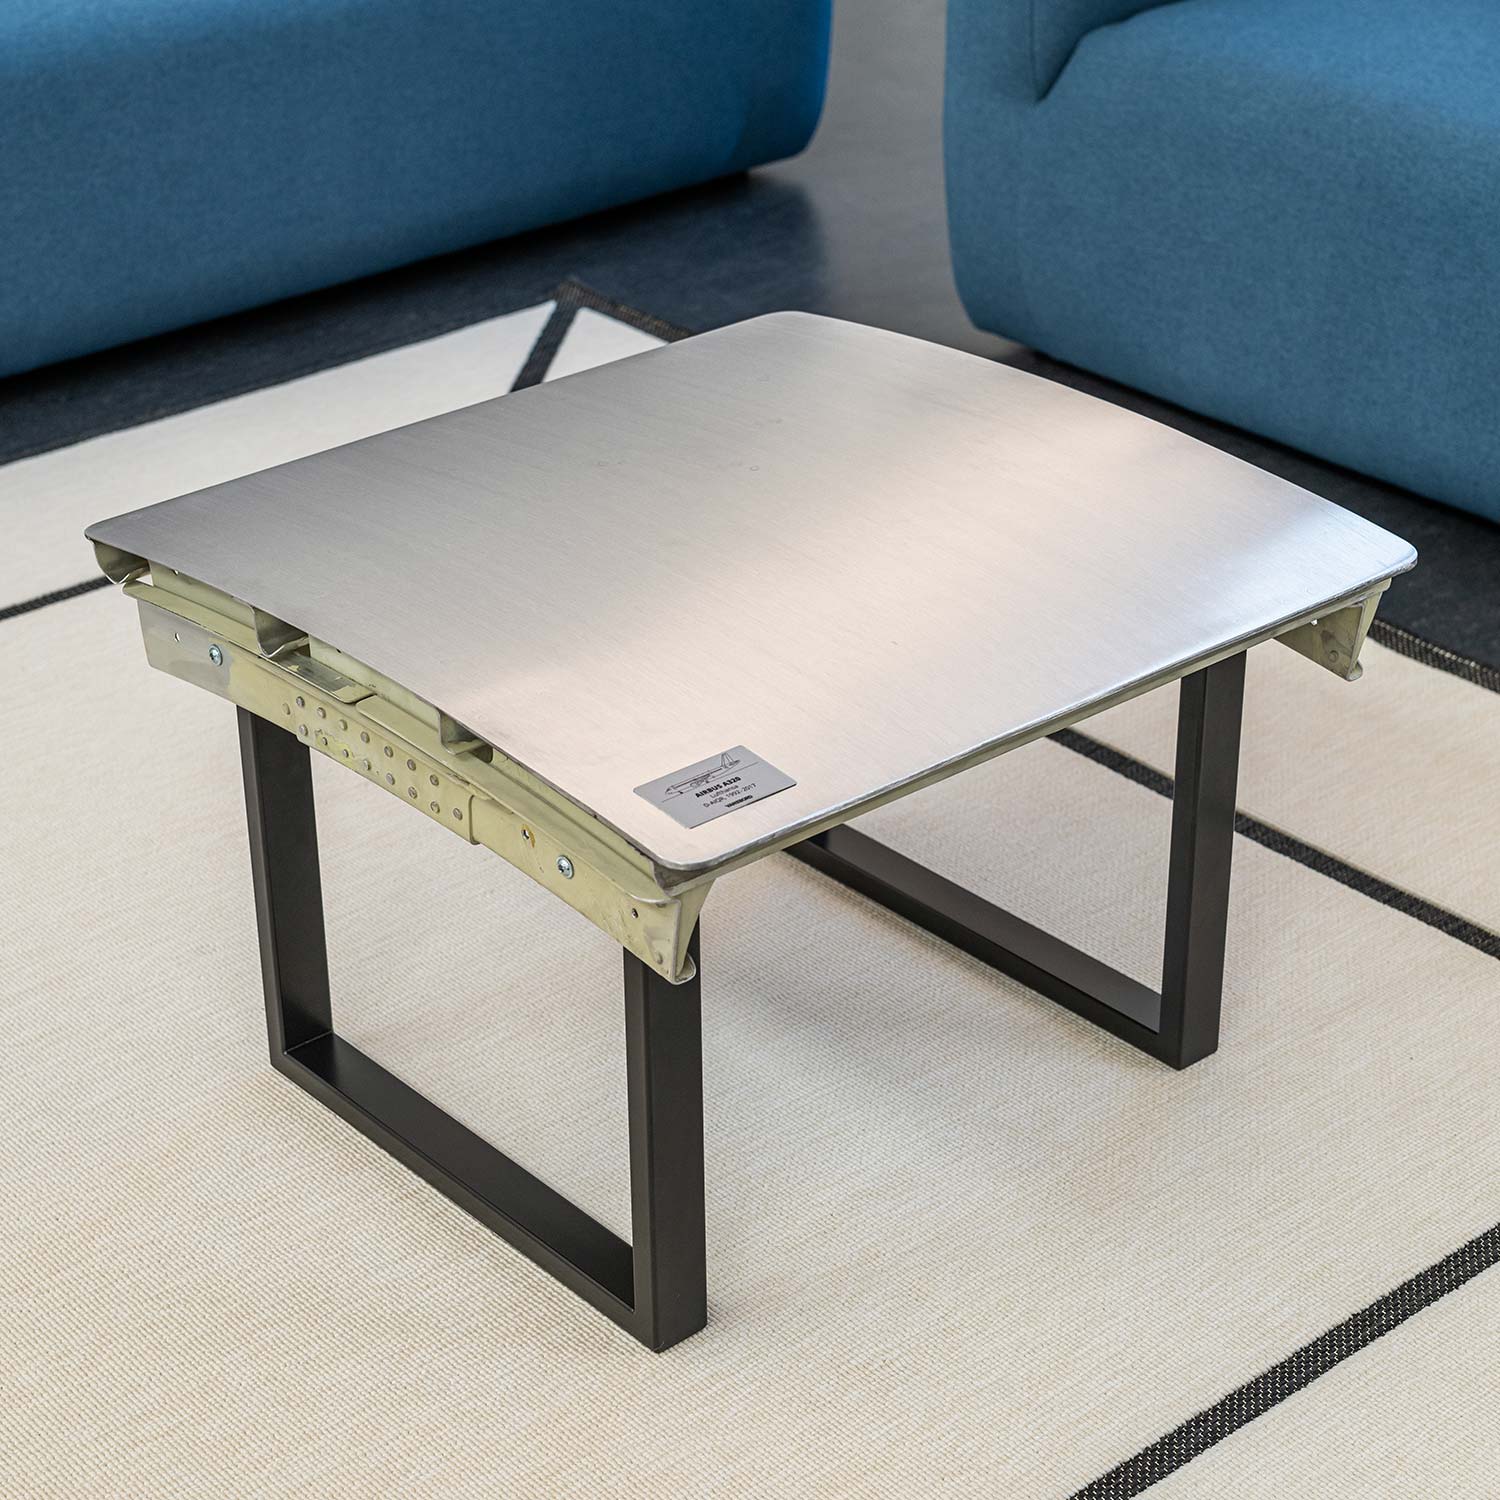 Side Table from Aircraft Parts, Brushed Aluminum, Frame: Black RAL 9011, approx. 62 x 59 cm